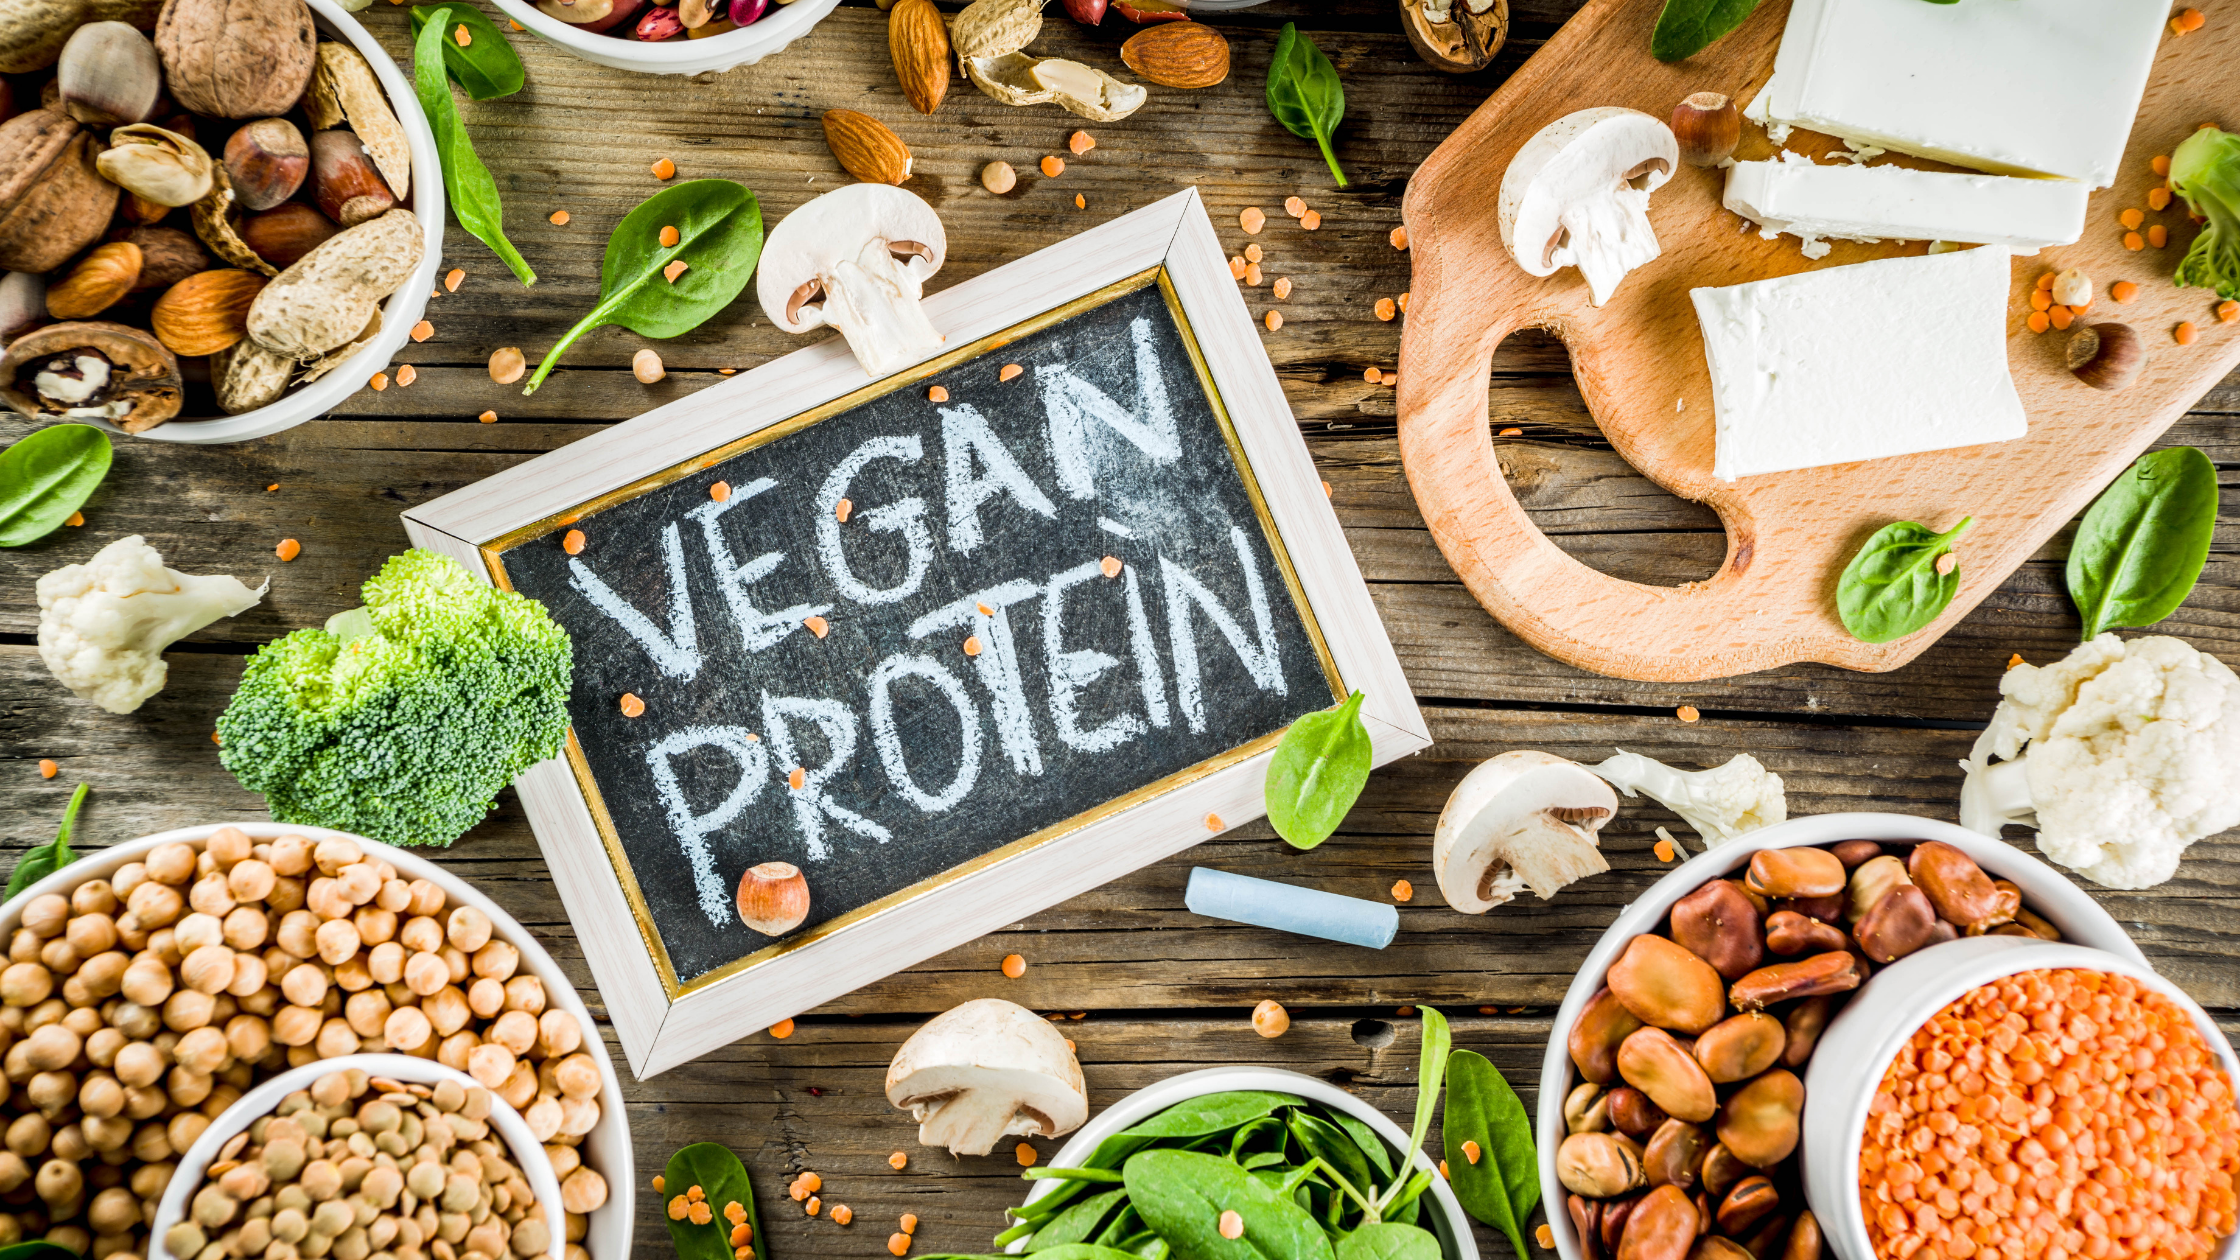 Blackboard with the words "Vegan Protein" surrounded by nuts, mushrooms, vegetables, and other vegan foods